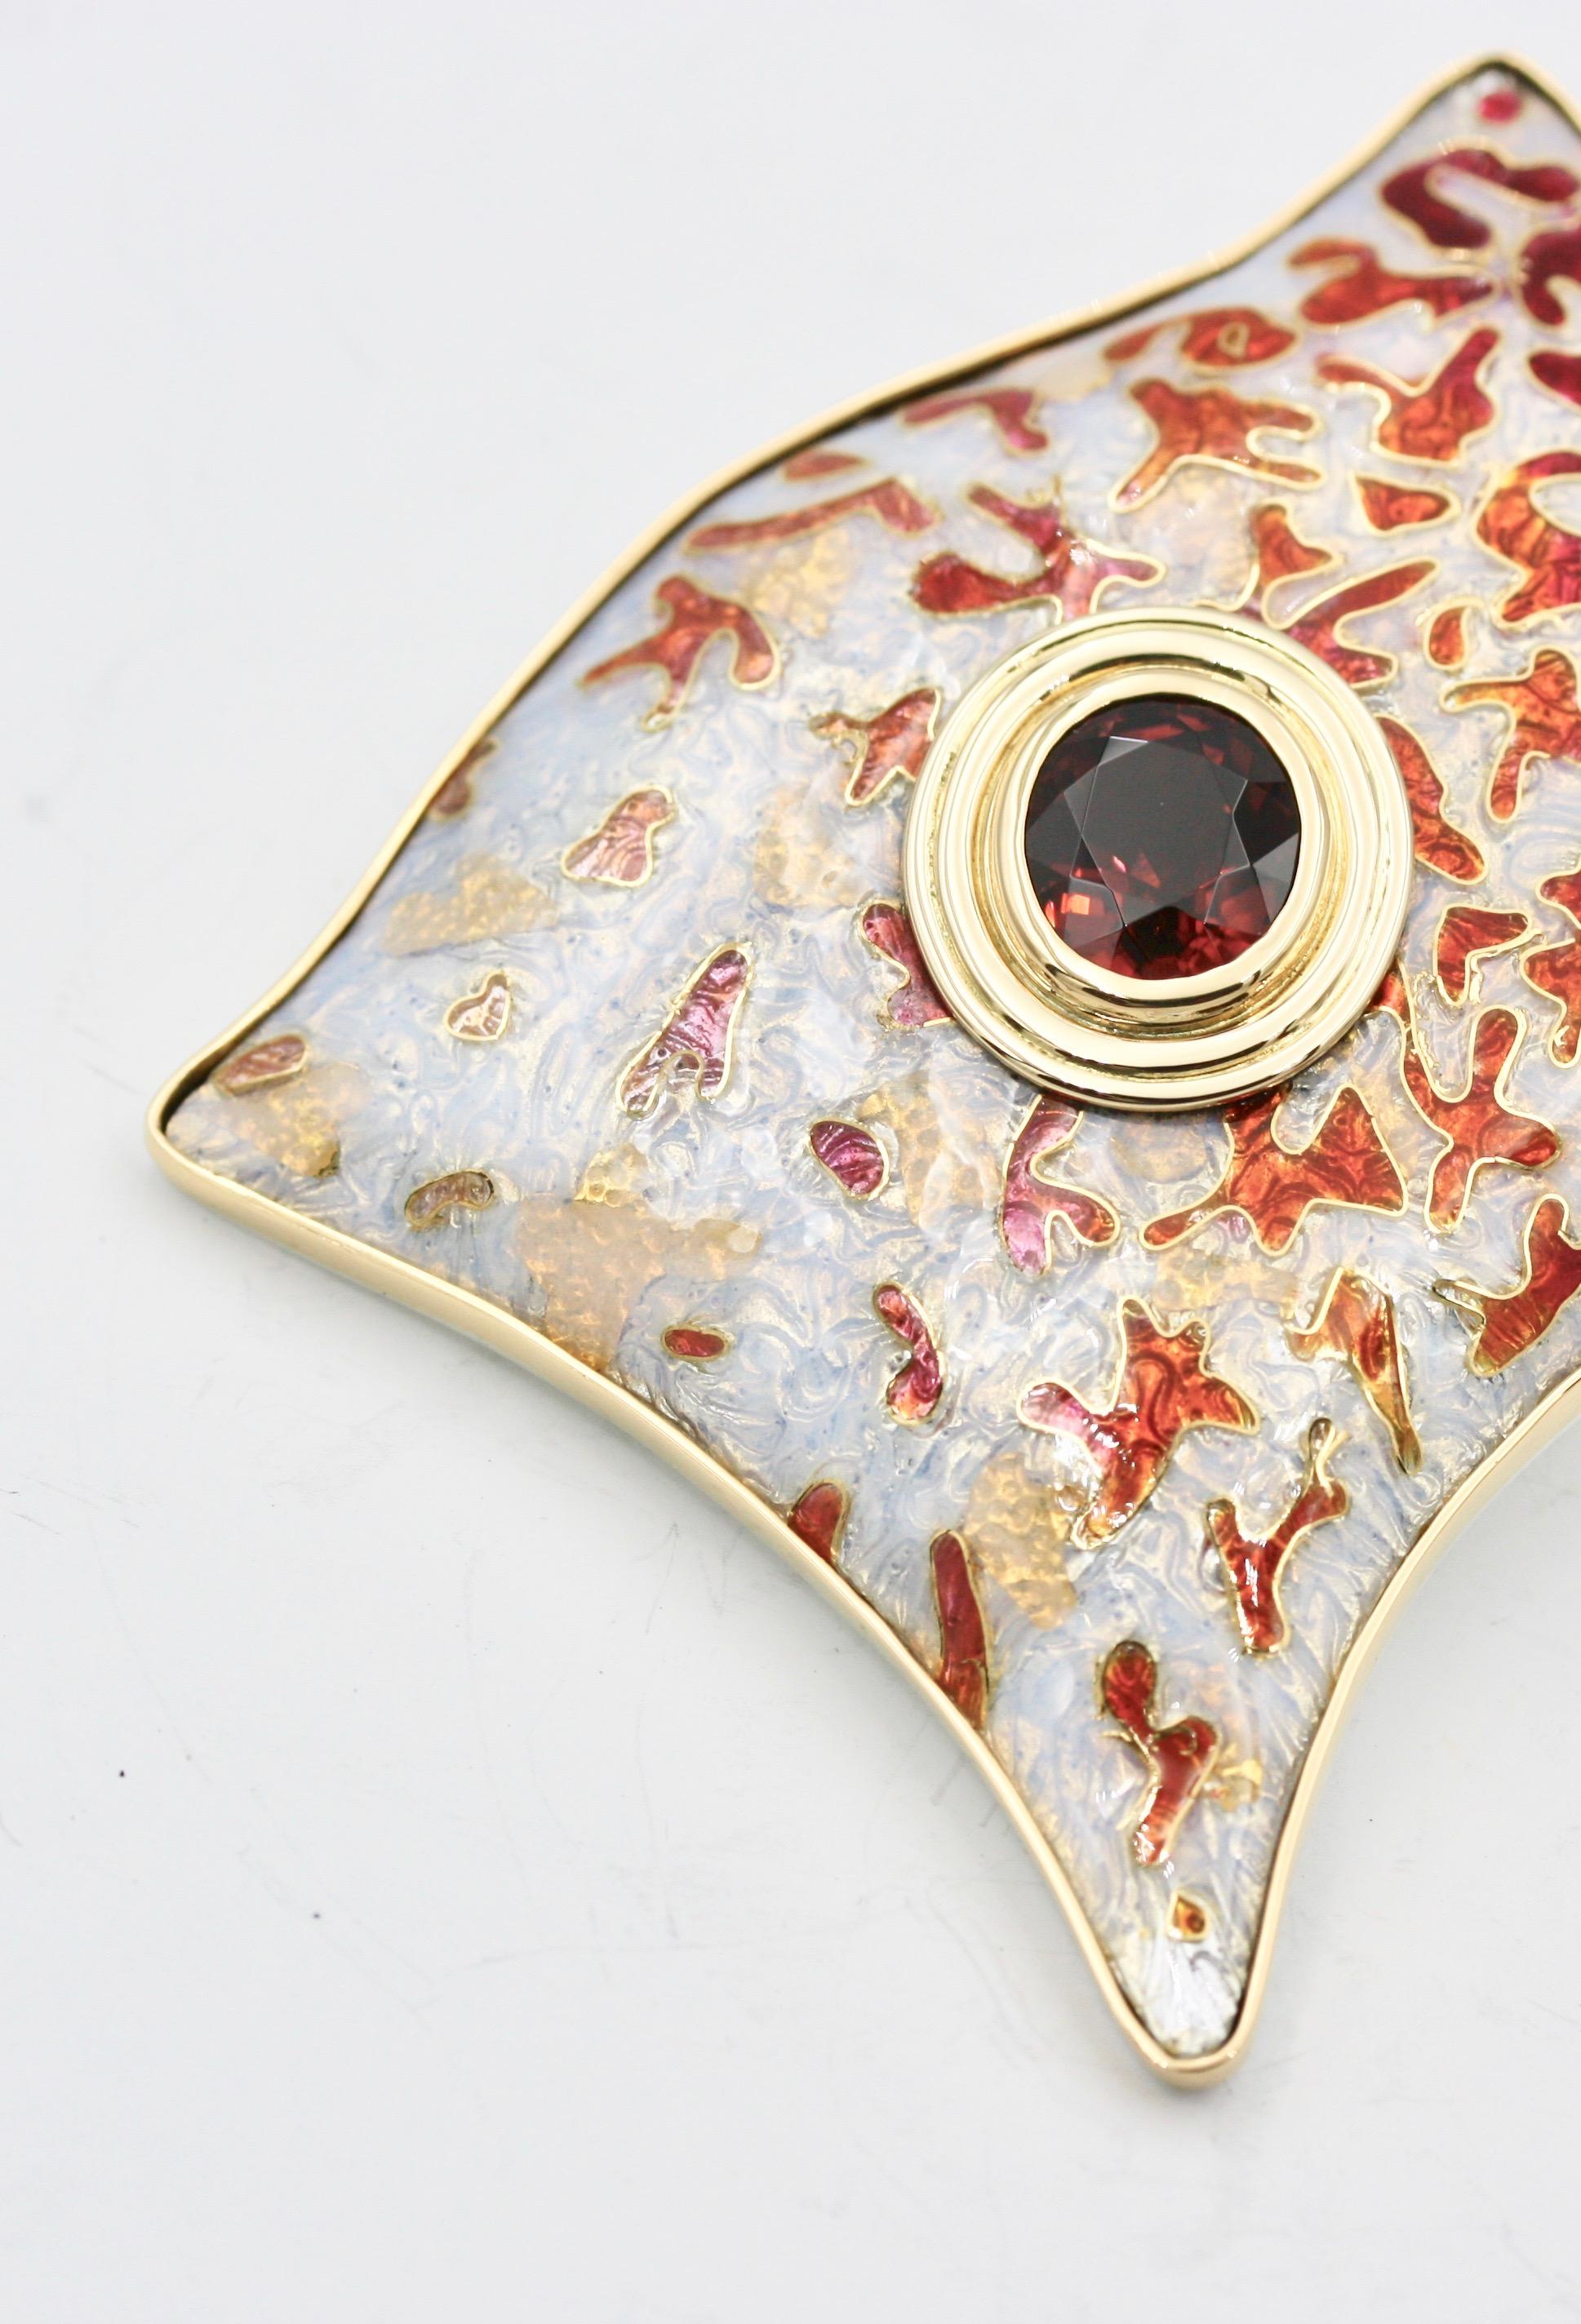 This hand made cloisonné enamel brooch is called INFATUTION. It is set in 22 Karat Yellow Gold with a 7.6 carat Tourmaline, 12.02 x 10.4 x 8.2mm. The red colours slowly shading to pale pink surrounded by pale opalescence. The enamel is inlaid with 